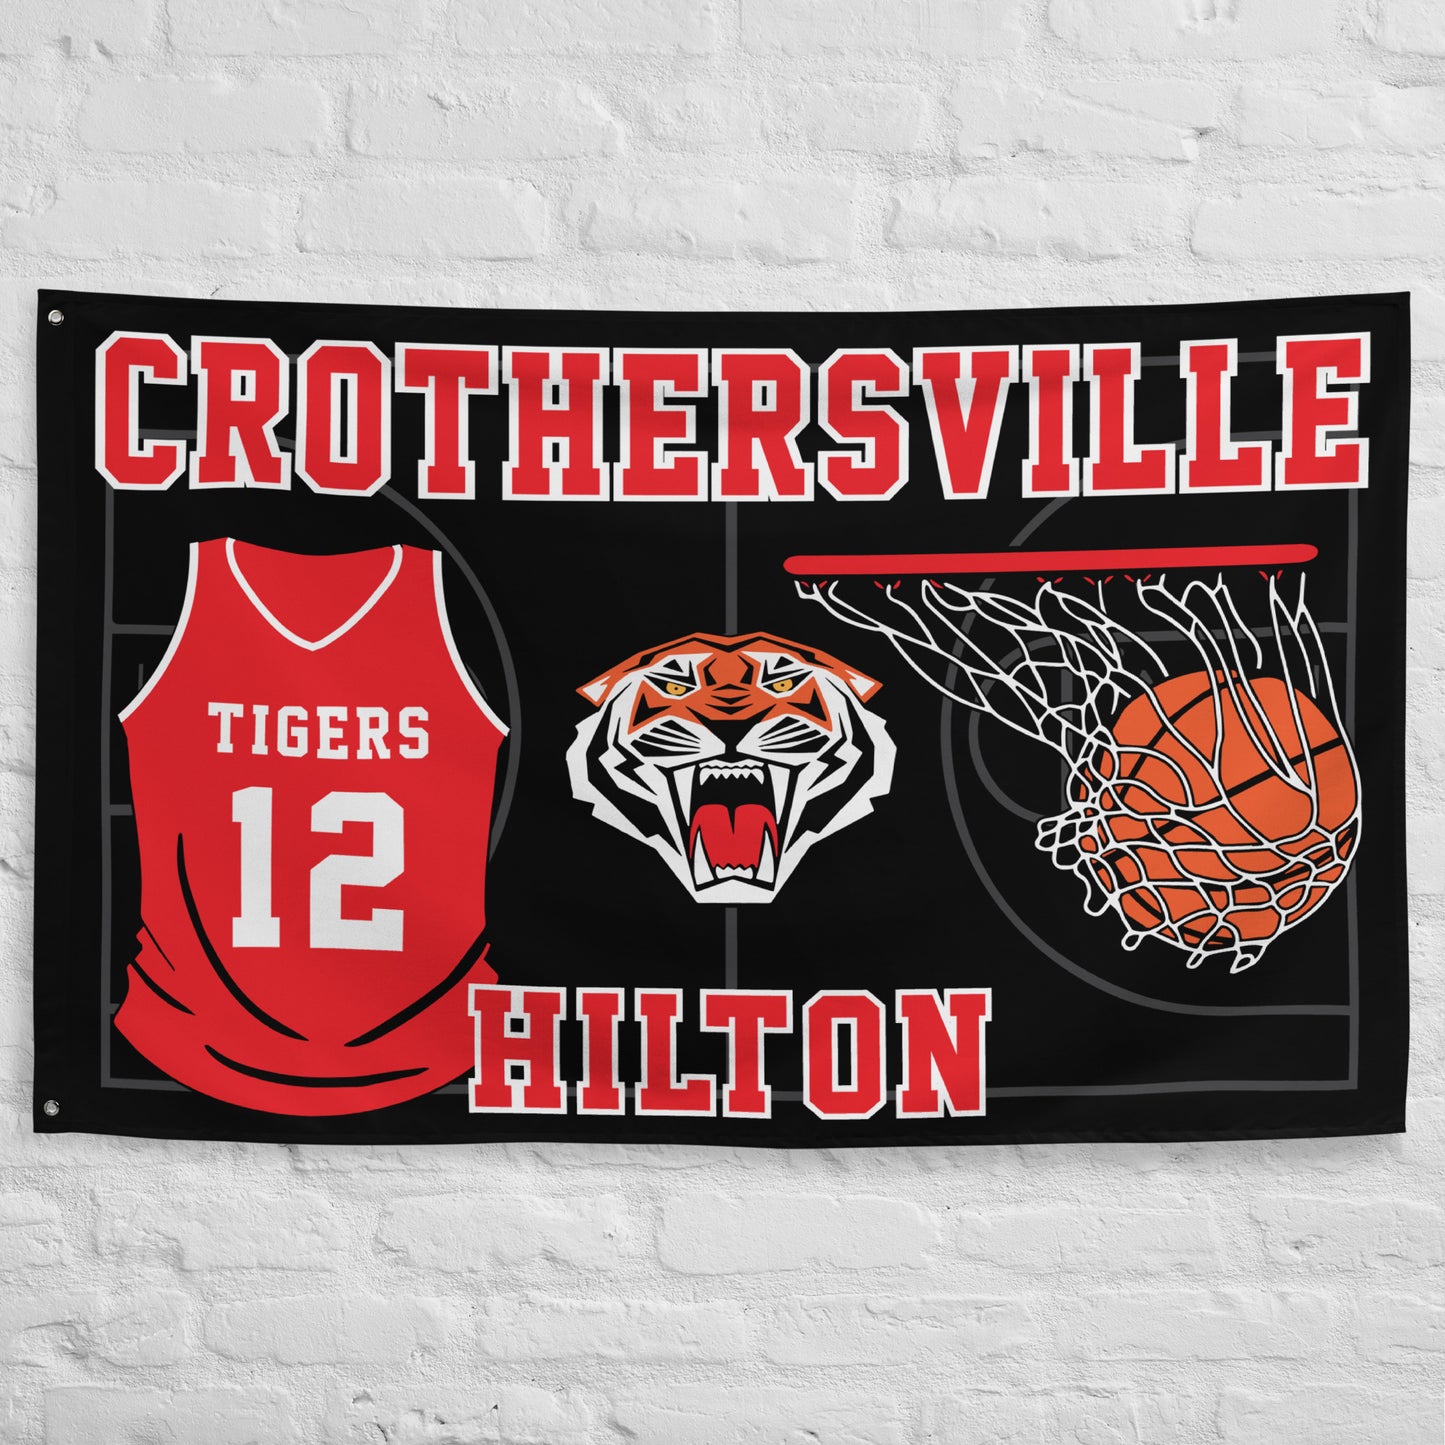 PERSONALIZED - Crothersville Tigers Basketball 5' x 3' Wall Flag